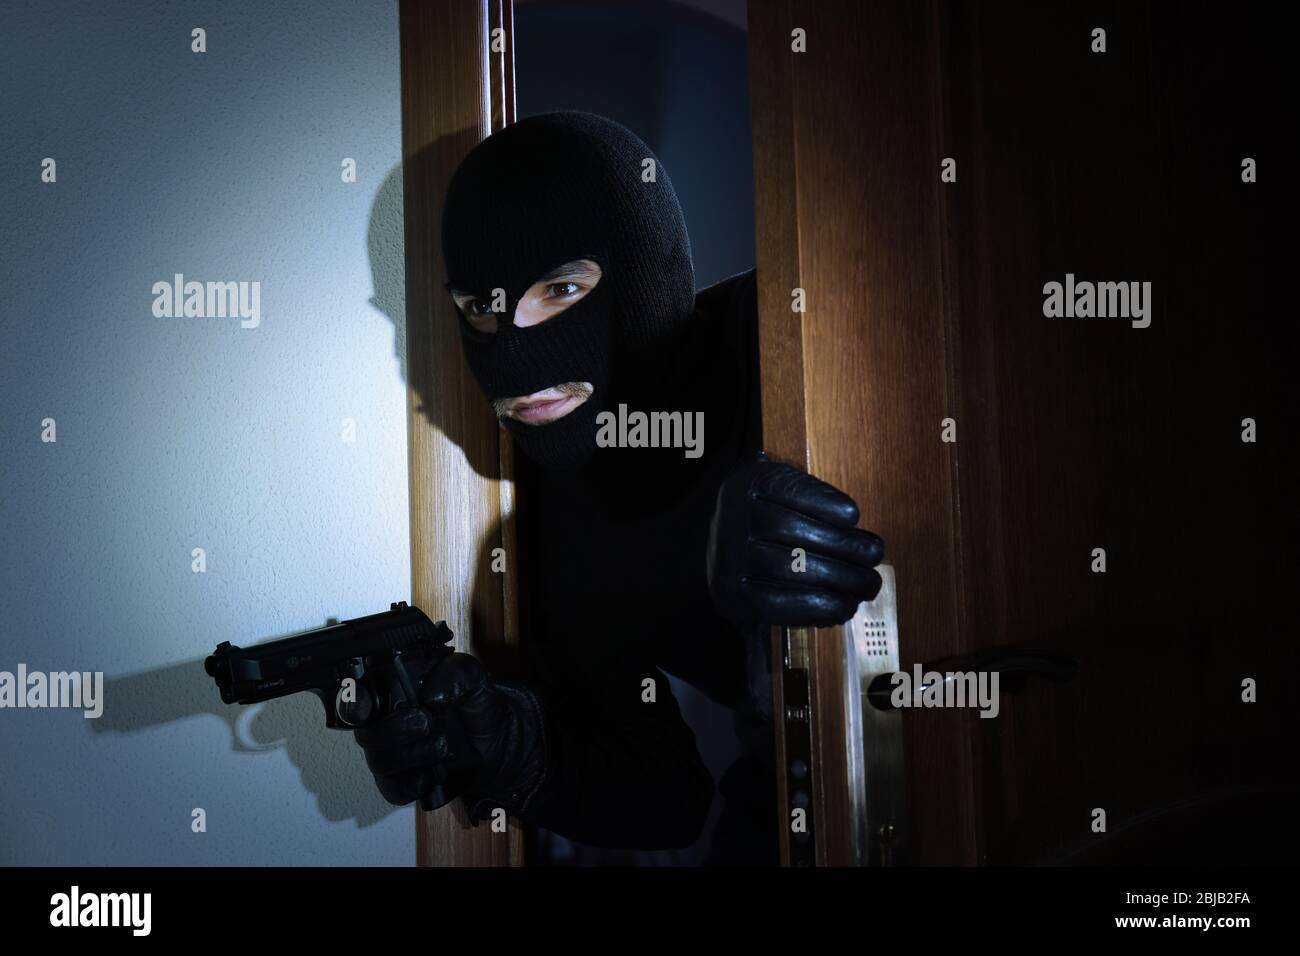 Armed thief entering a house Stock Photo